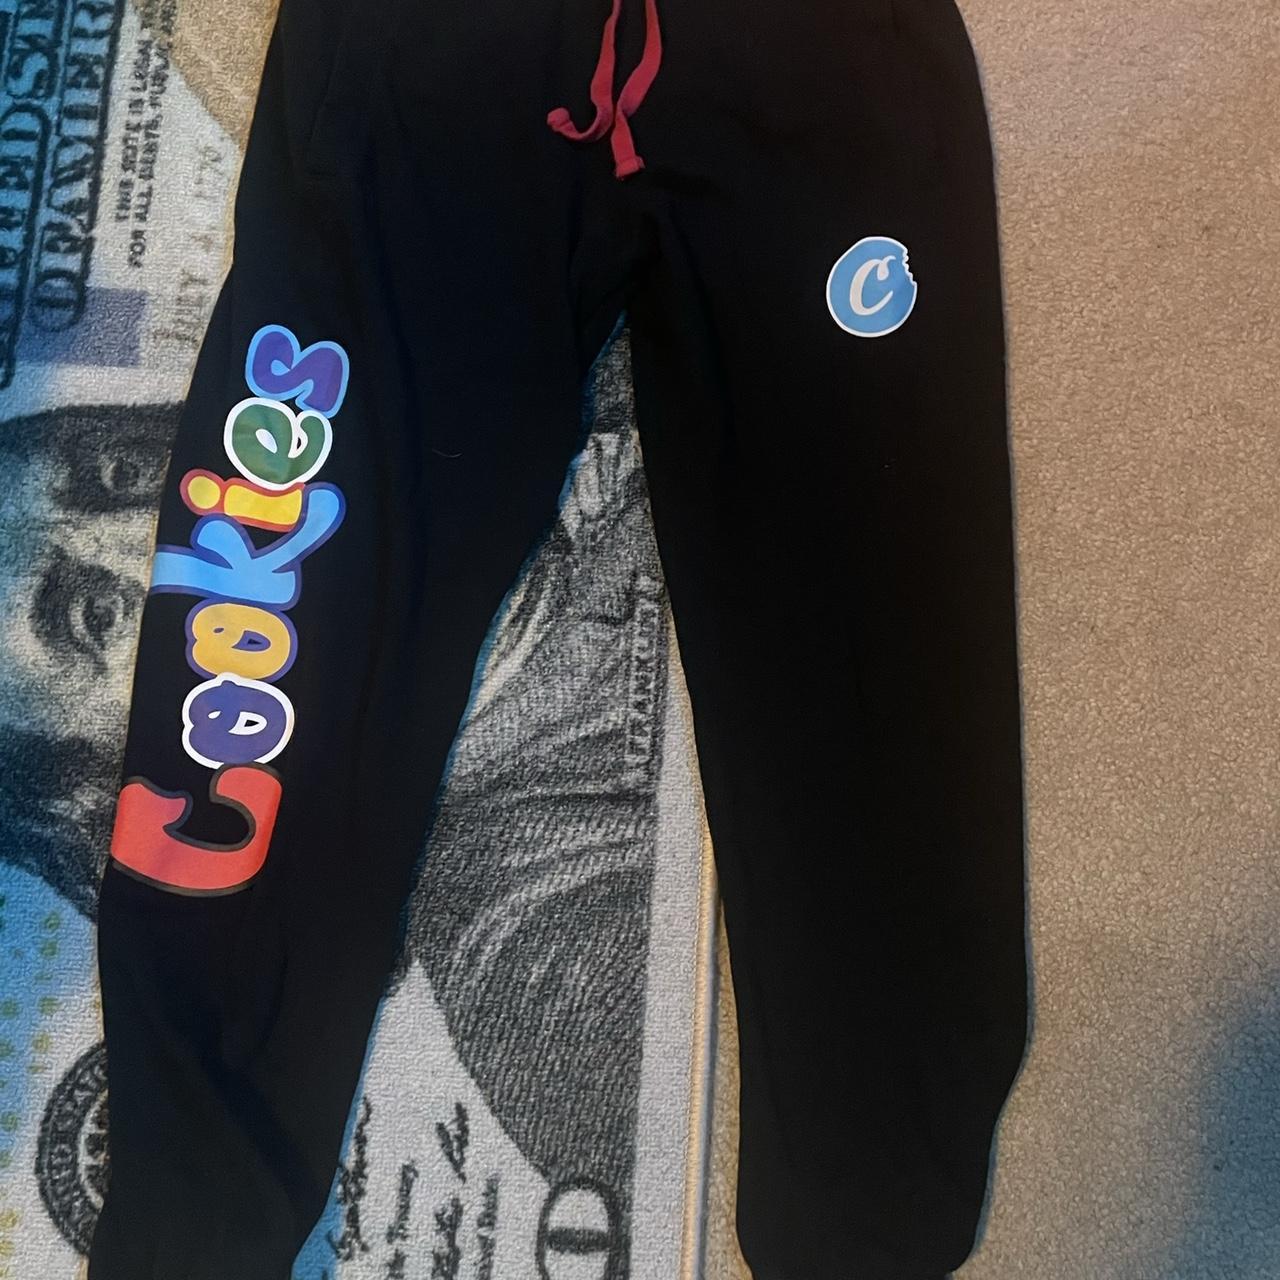 Cookies Sweatpants size Large Color is